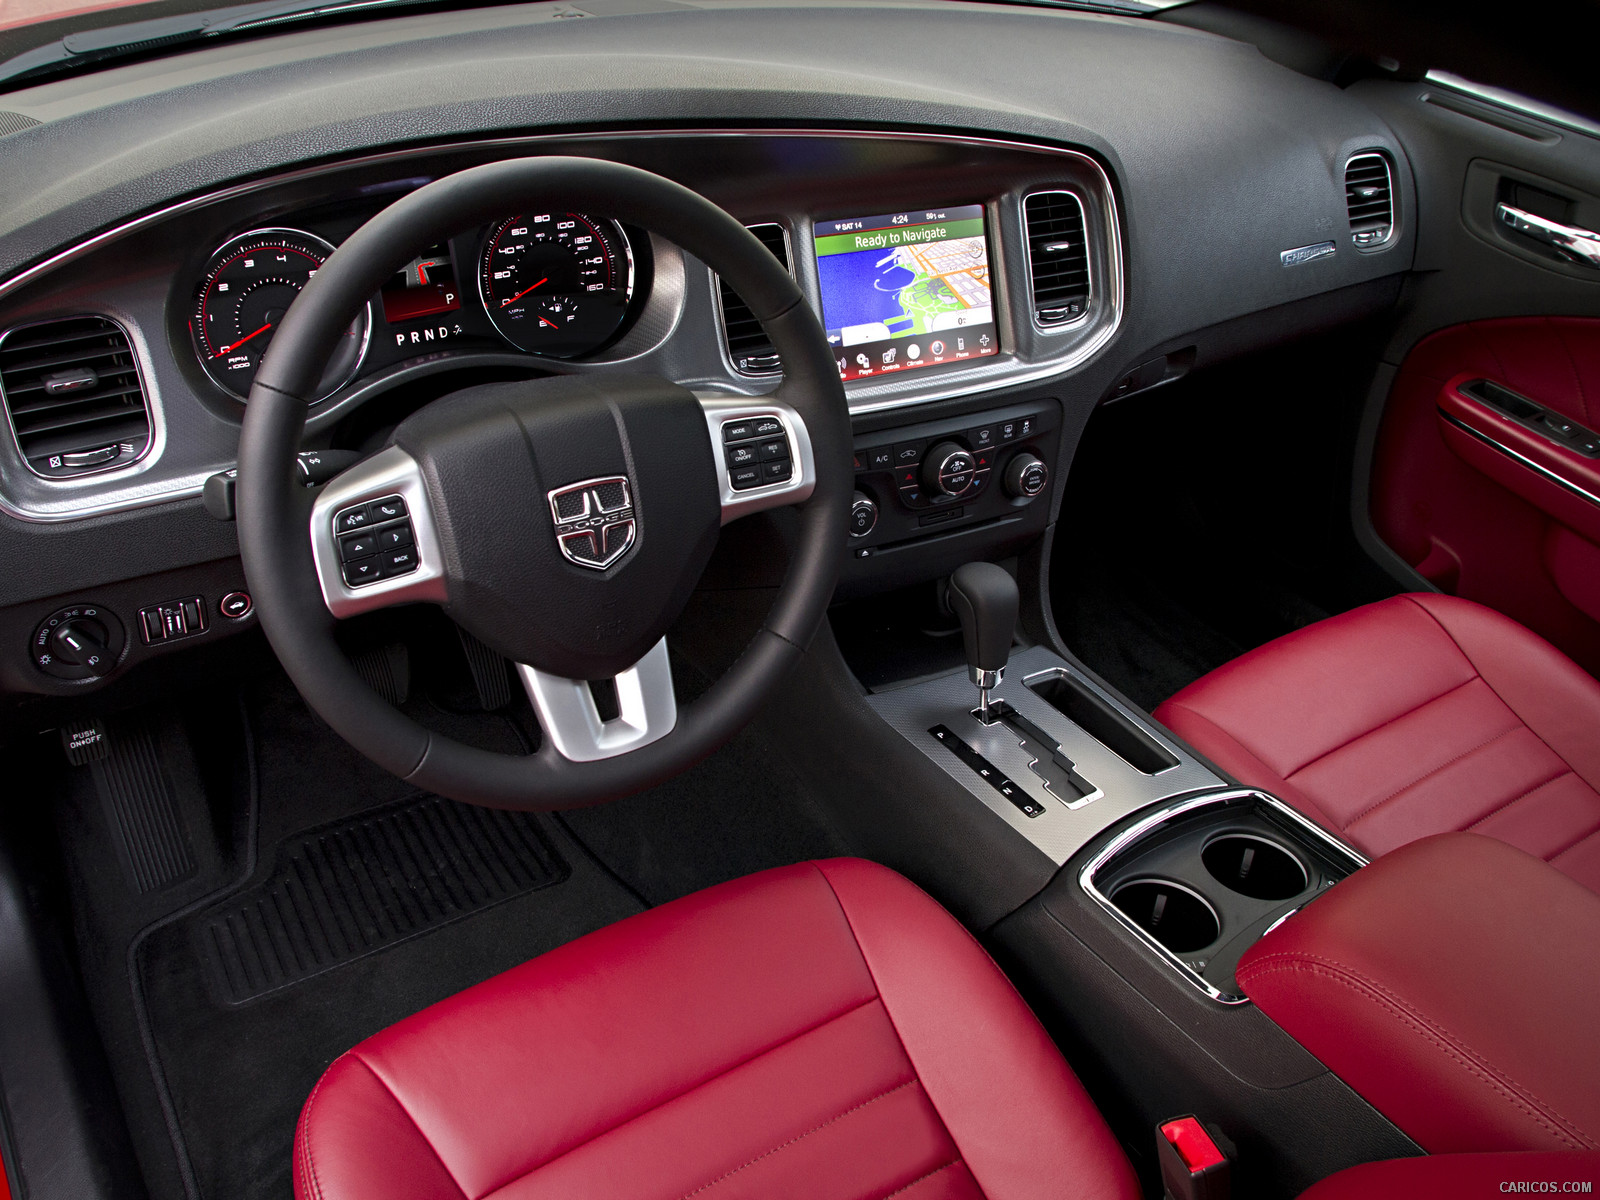 2012 Dodge Charger Srt8 Review Outside Inside Youtube 2013